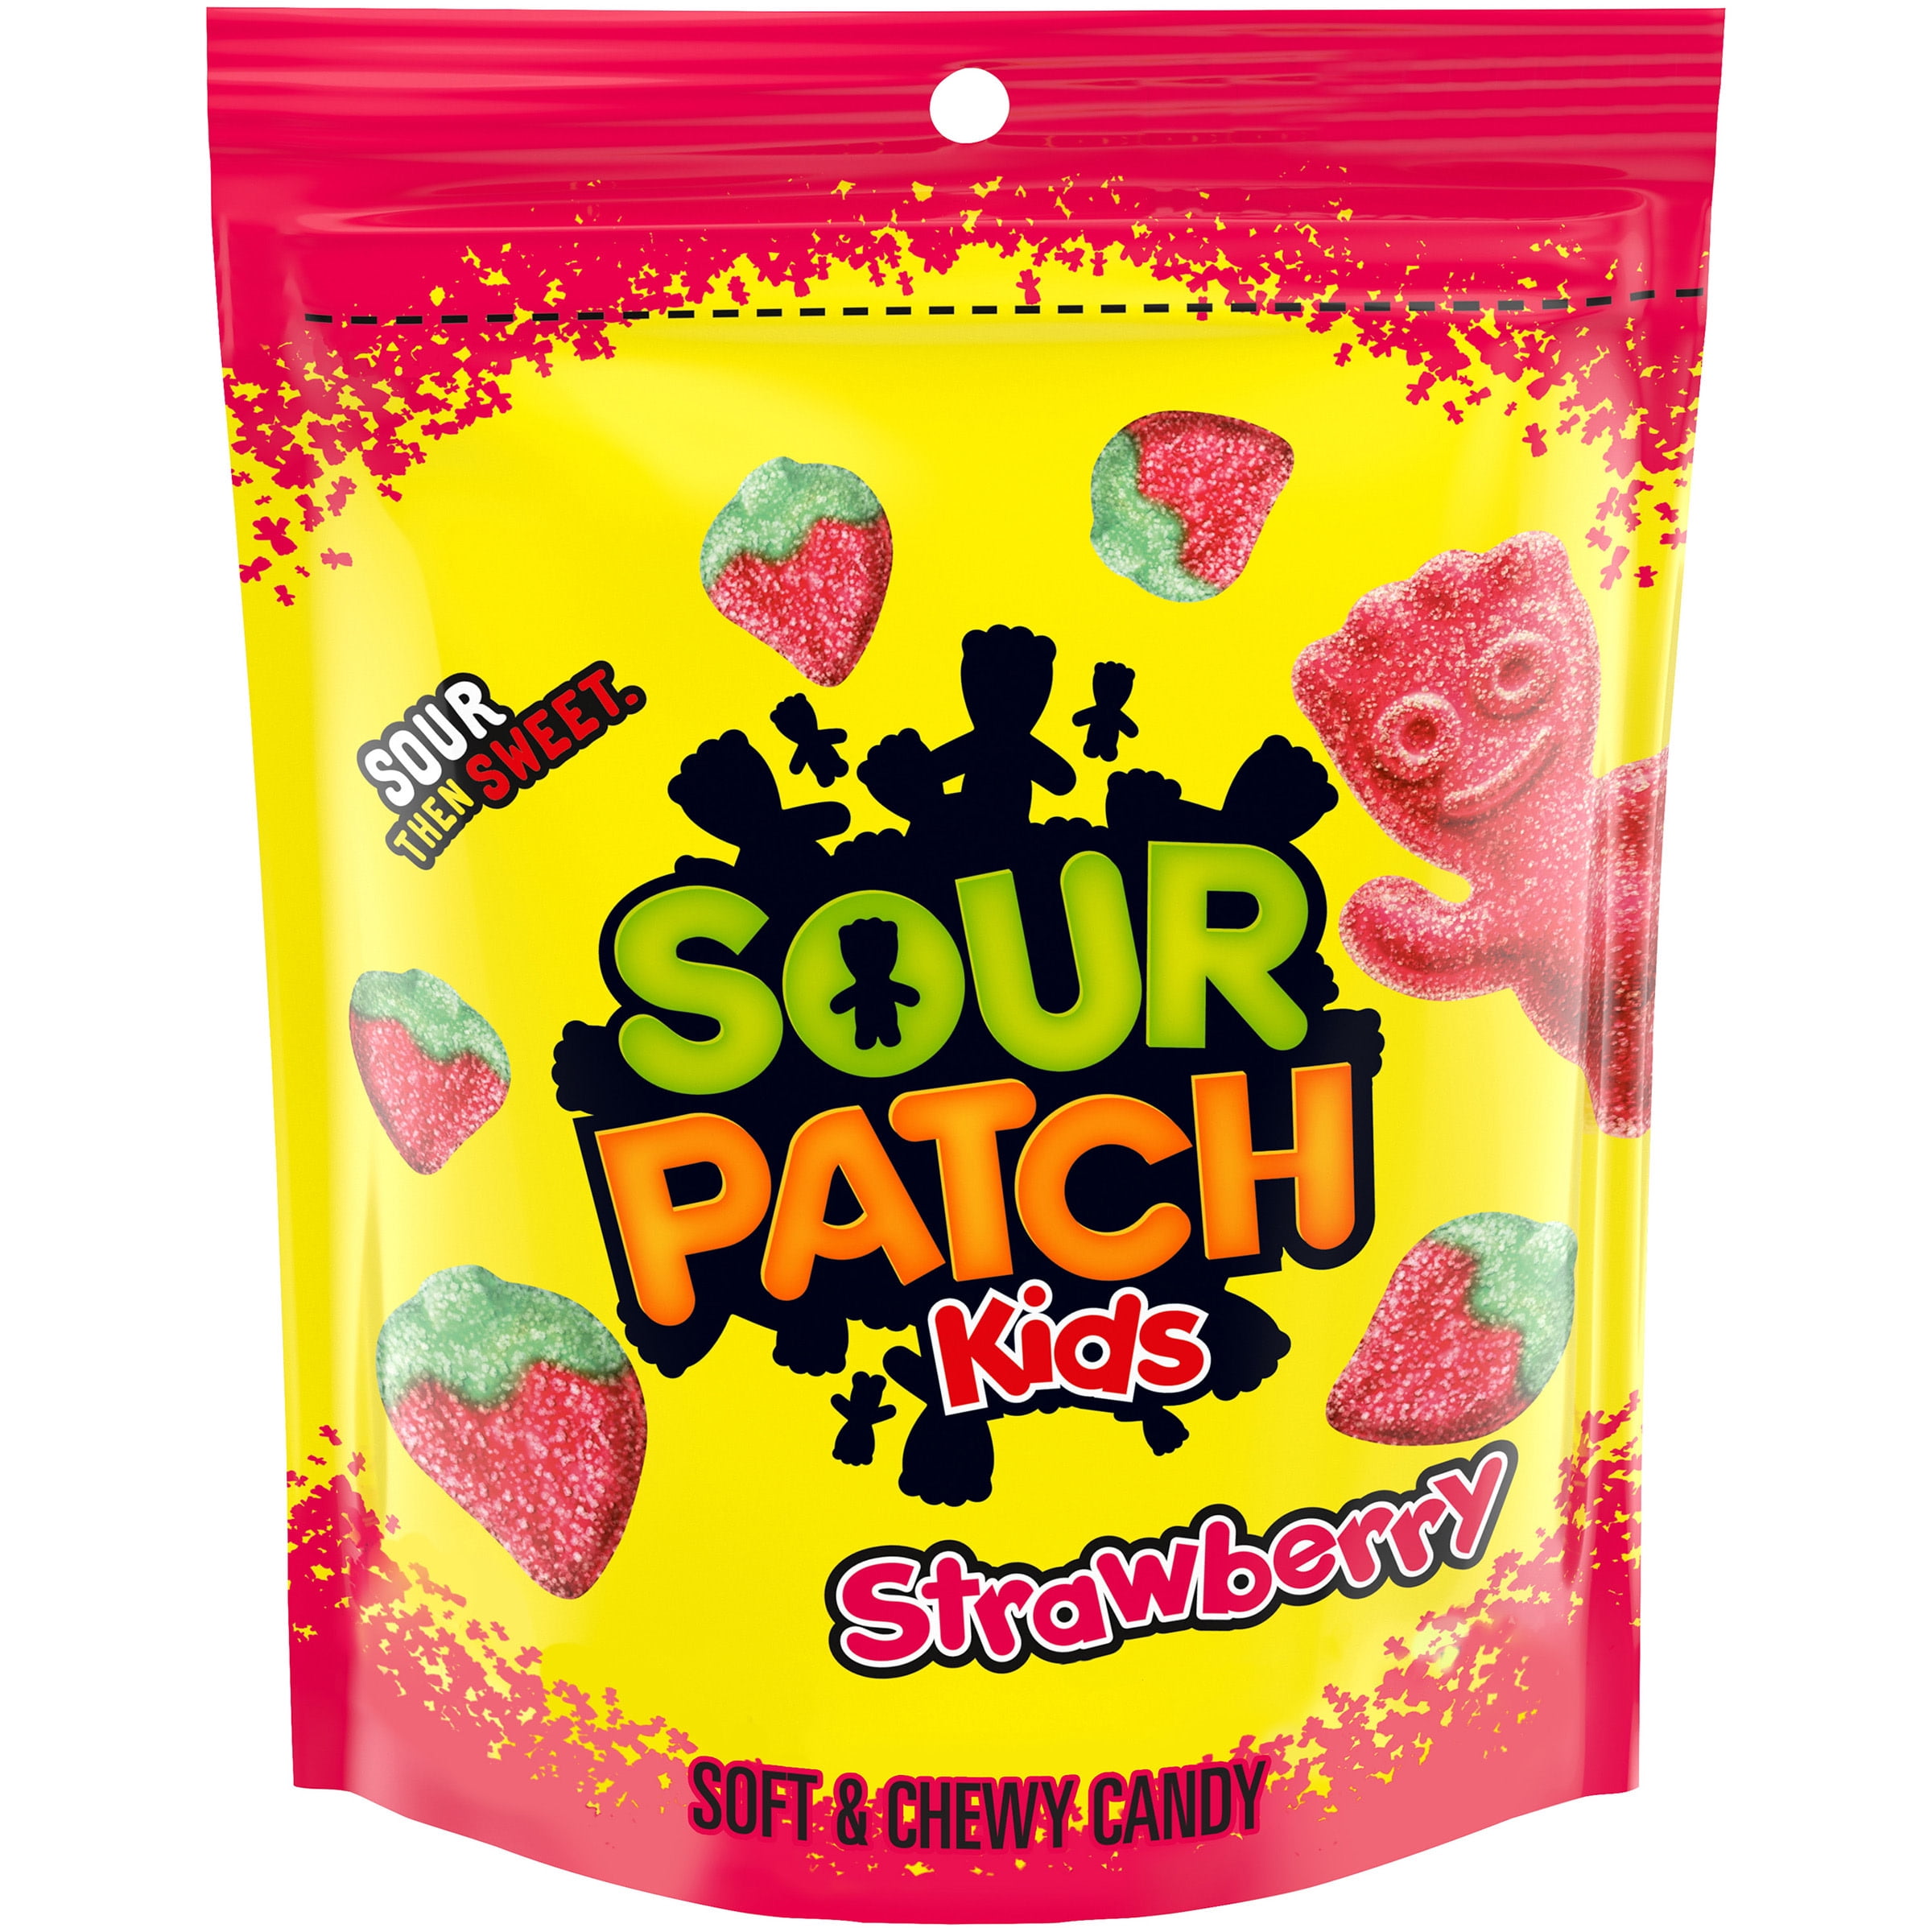 Sour patch lyds